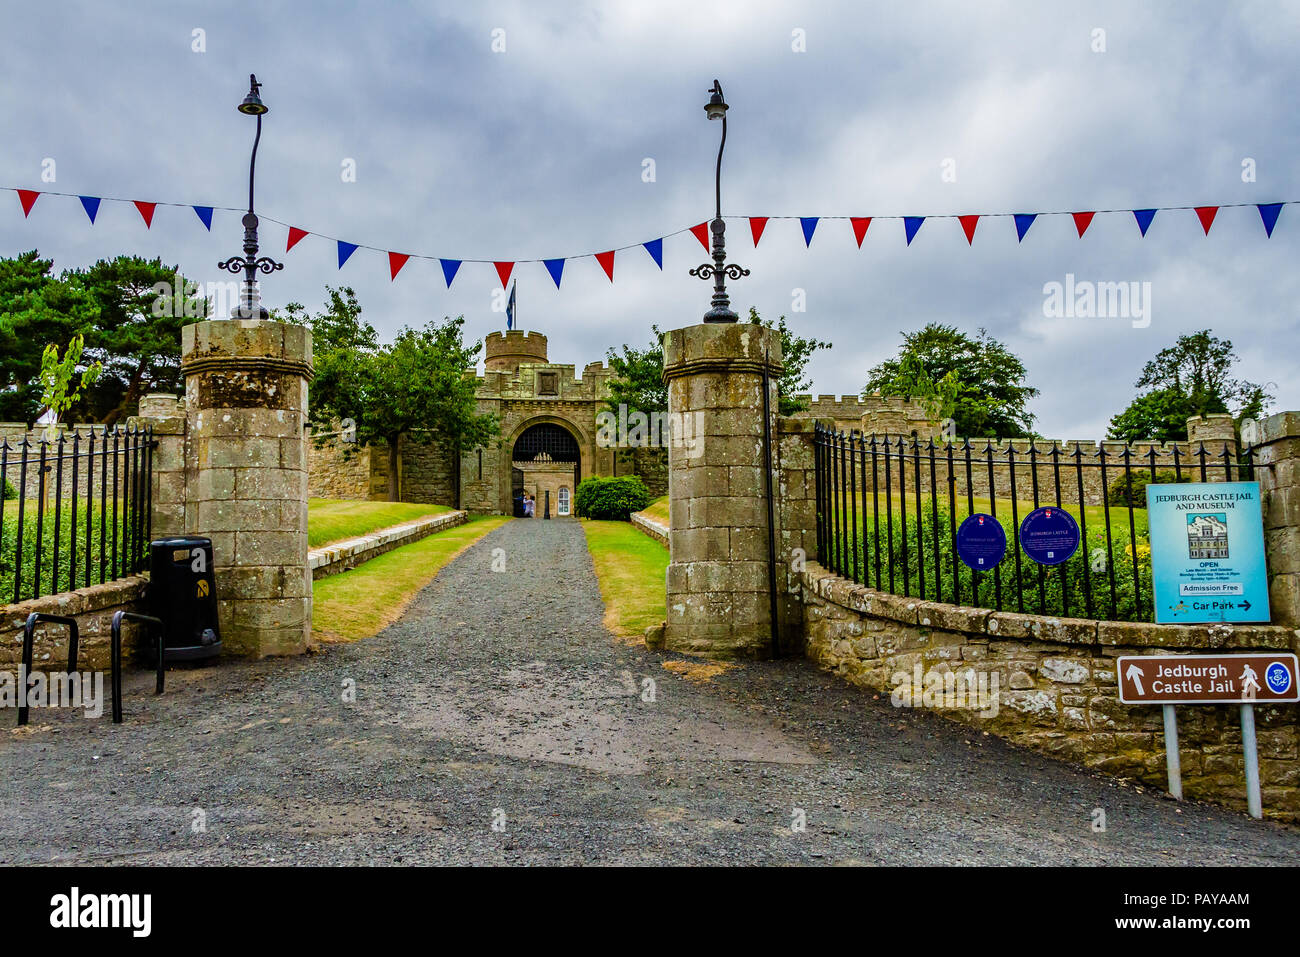 Driveway entrance to Jedburgh Castle & Jail Museum, housed in the town's old Victorian jail, Jedburgh, Scotland, UK. Stock Photo